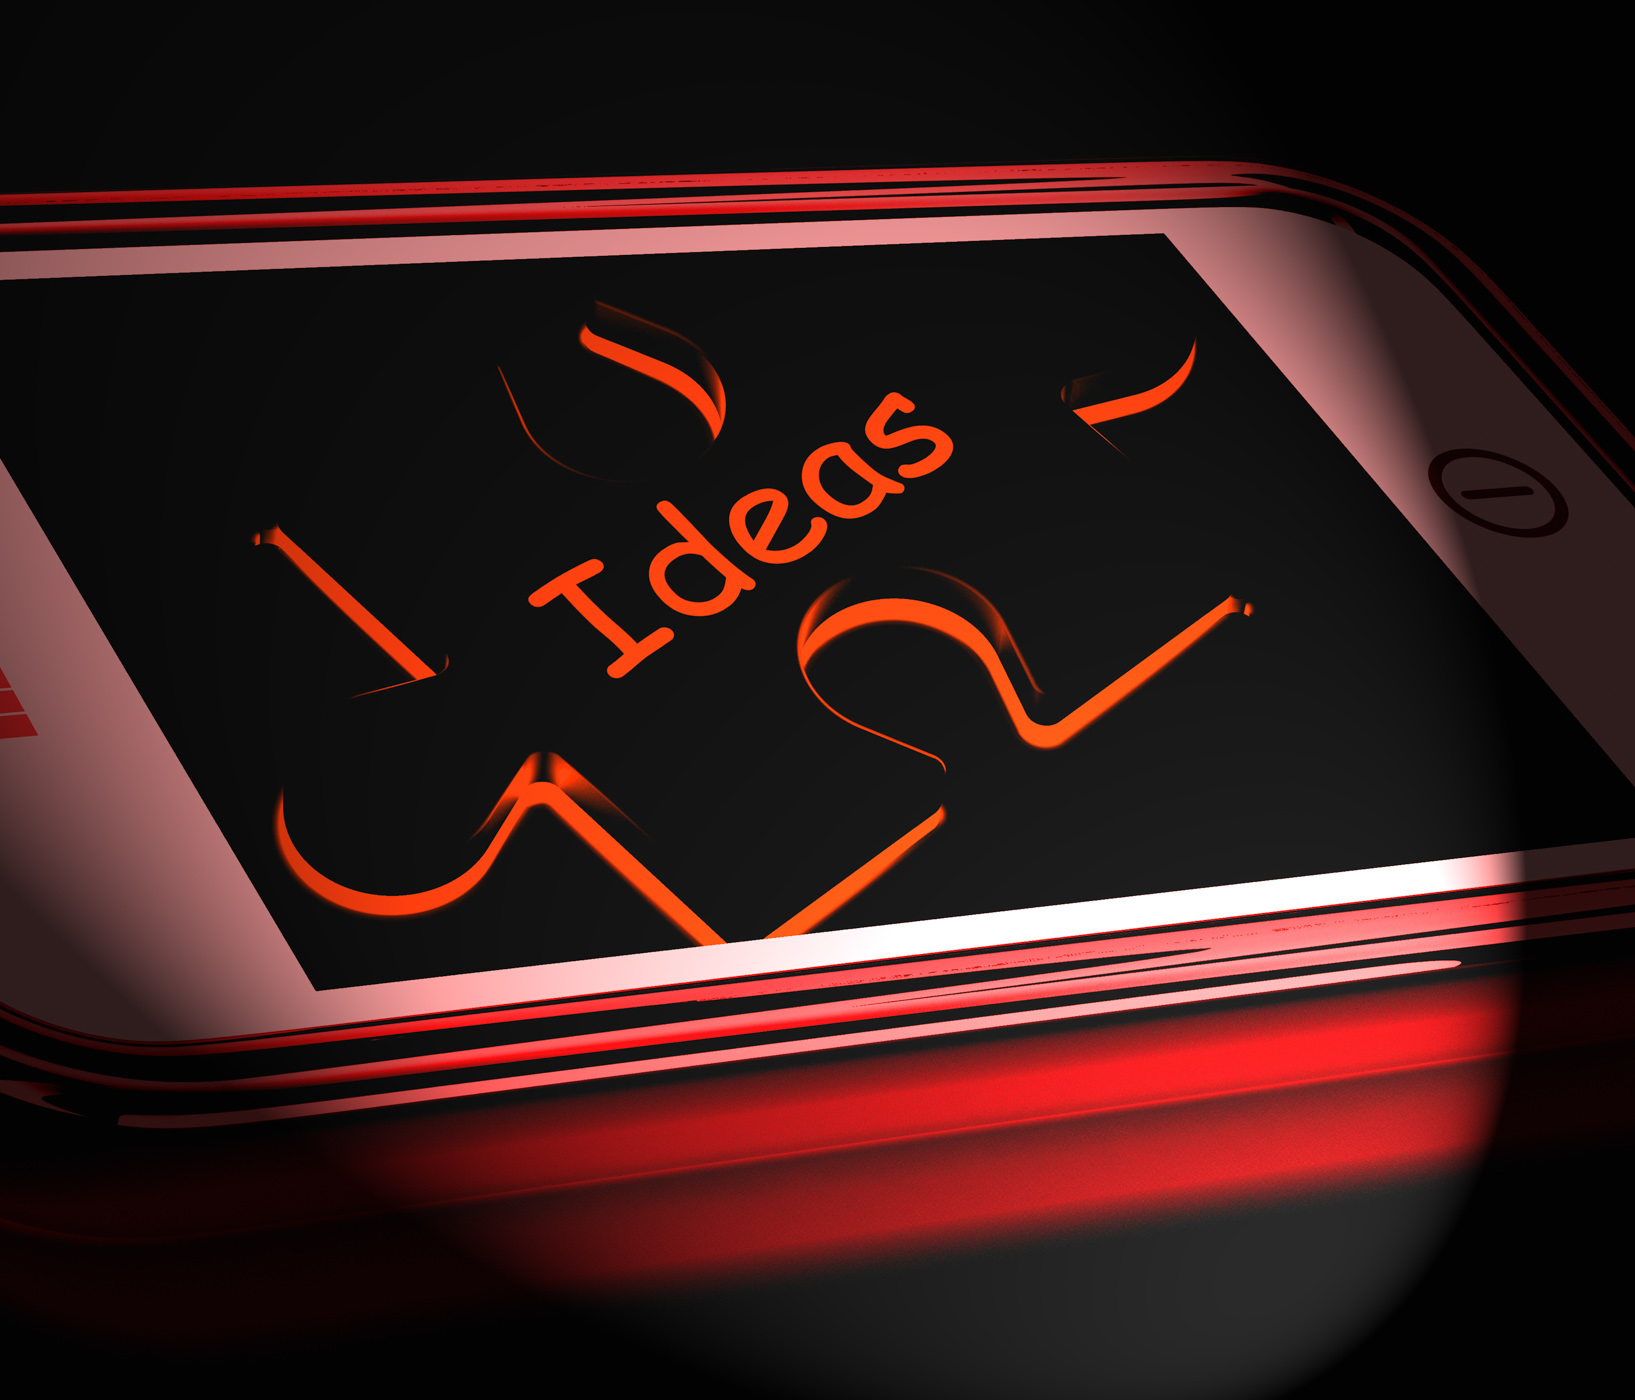 Ideas smartphone displays inspiration thoughts and concepts photo